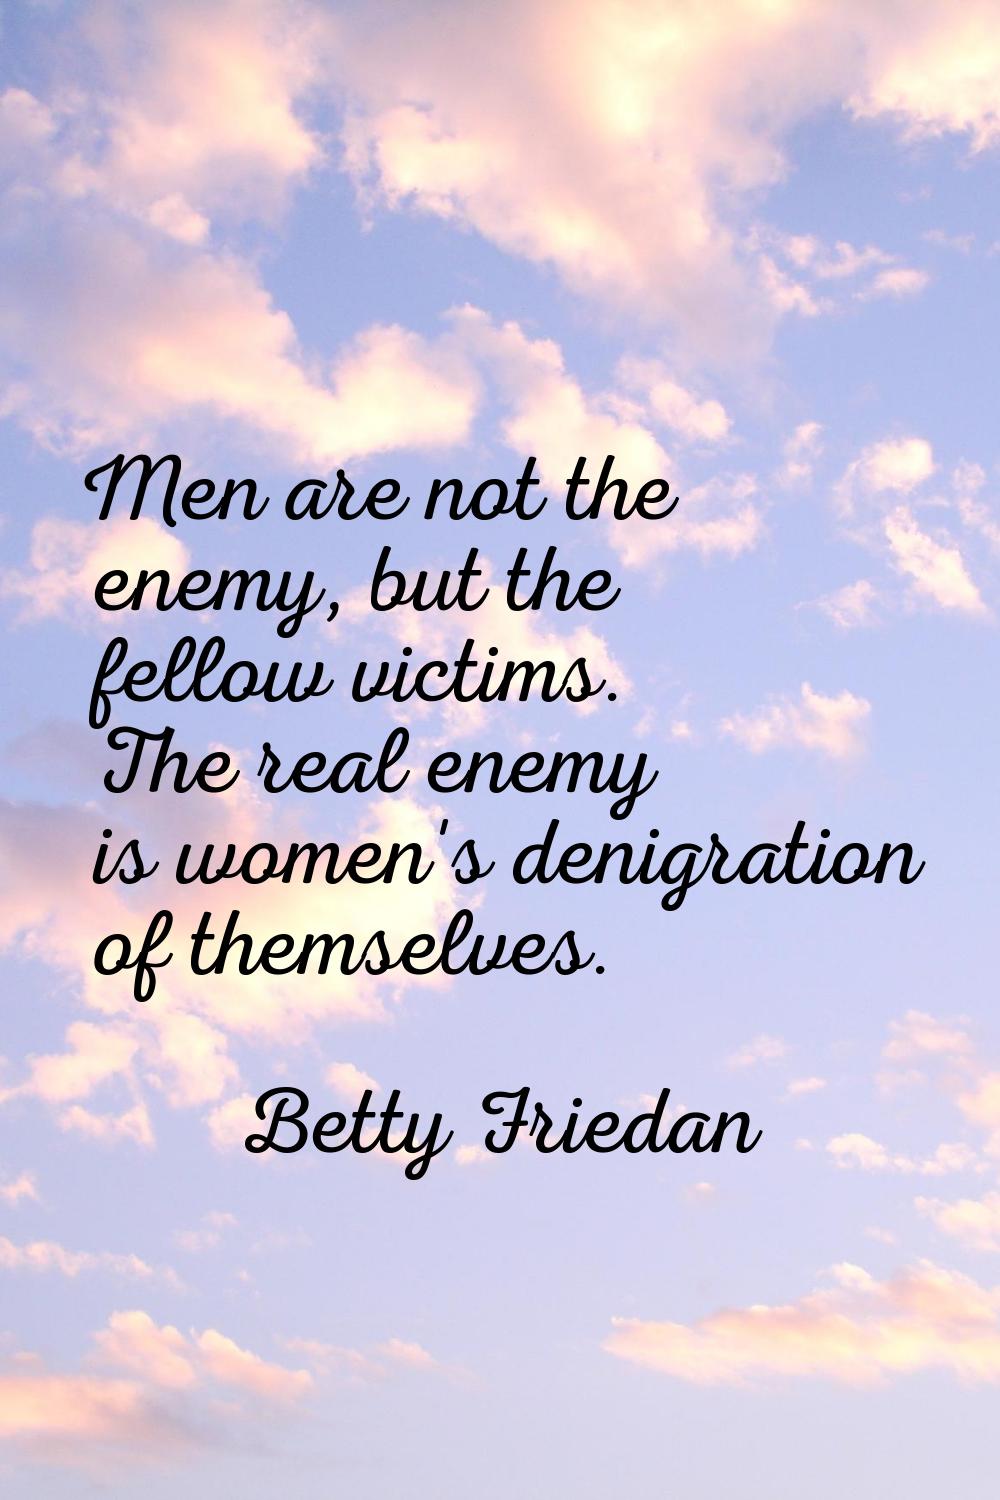 Men are not the enemy, but the fellow victims. The real enemy is women's denigration of themselves.